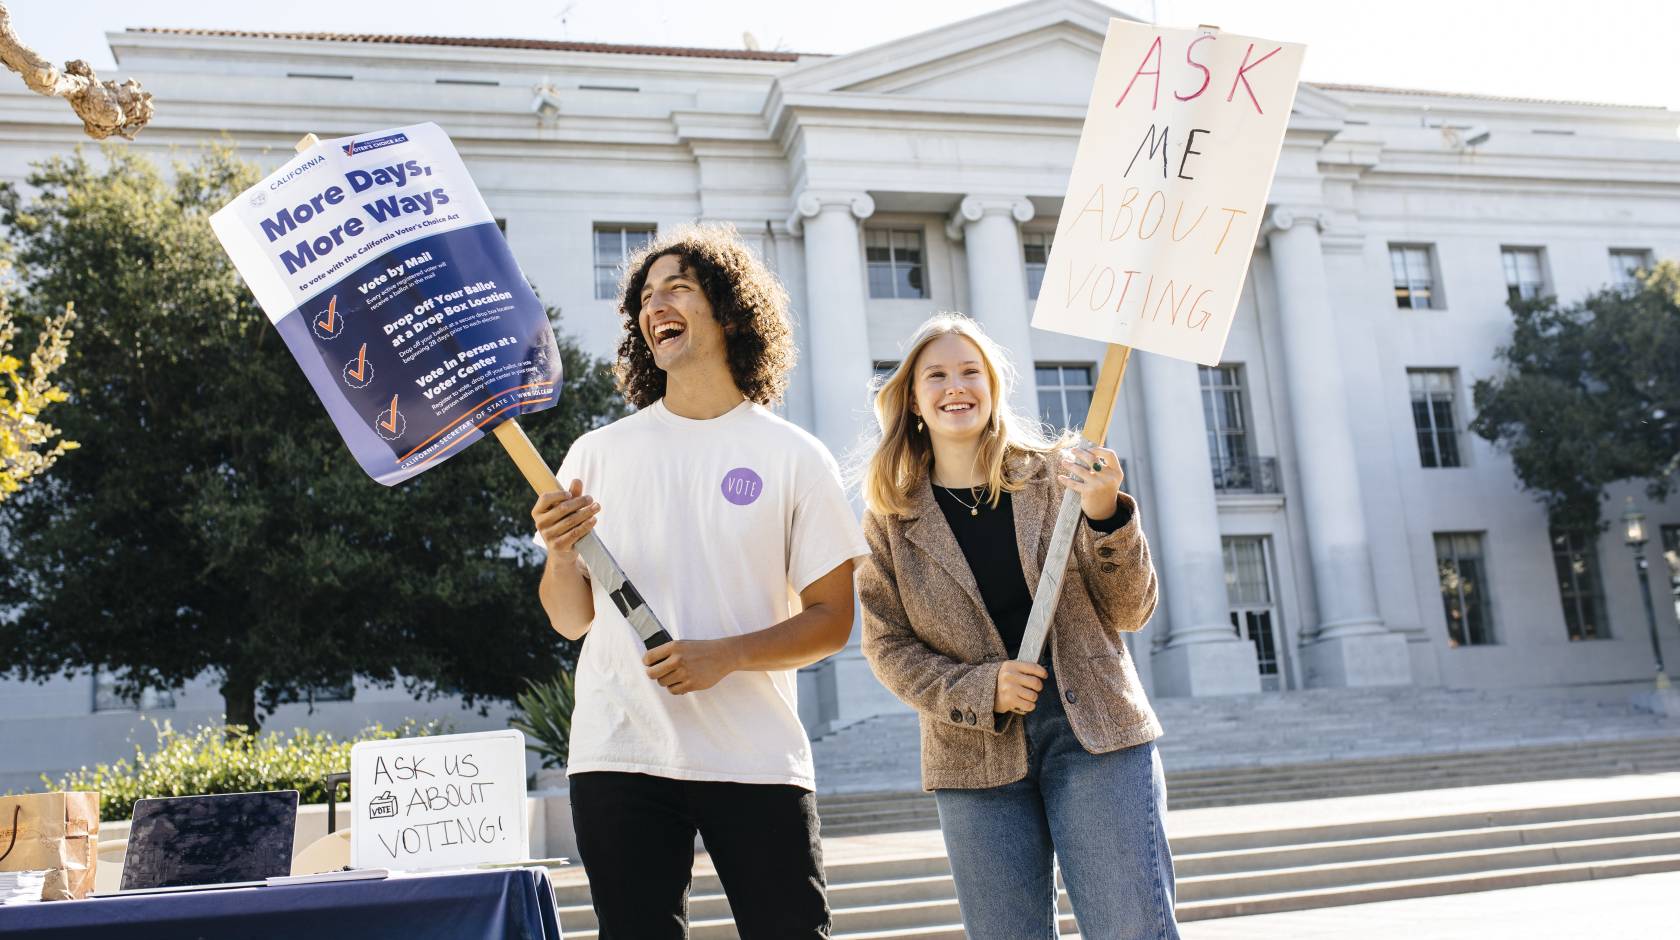 Students Alex Edgar and Skylar Betts hold signs about voting on Sproul Plaza